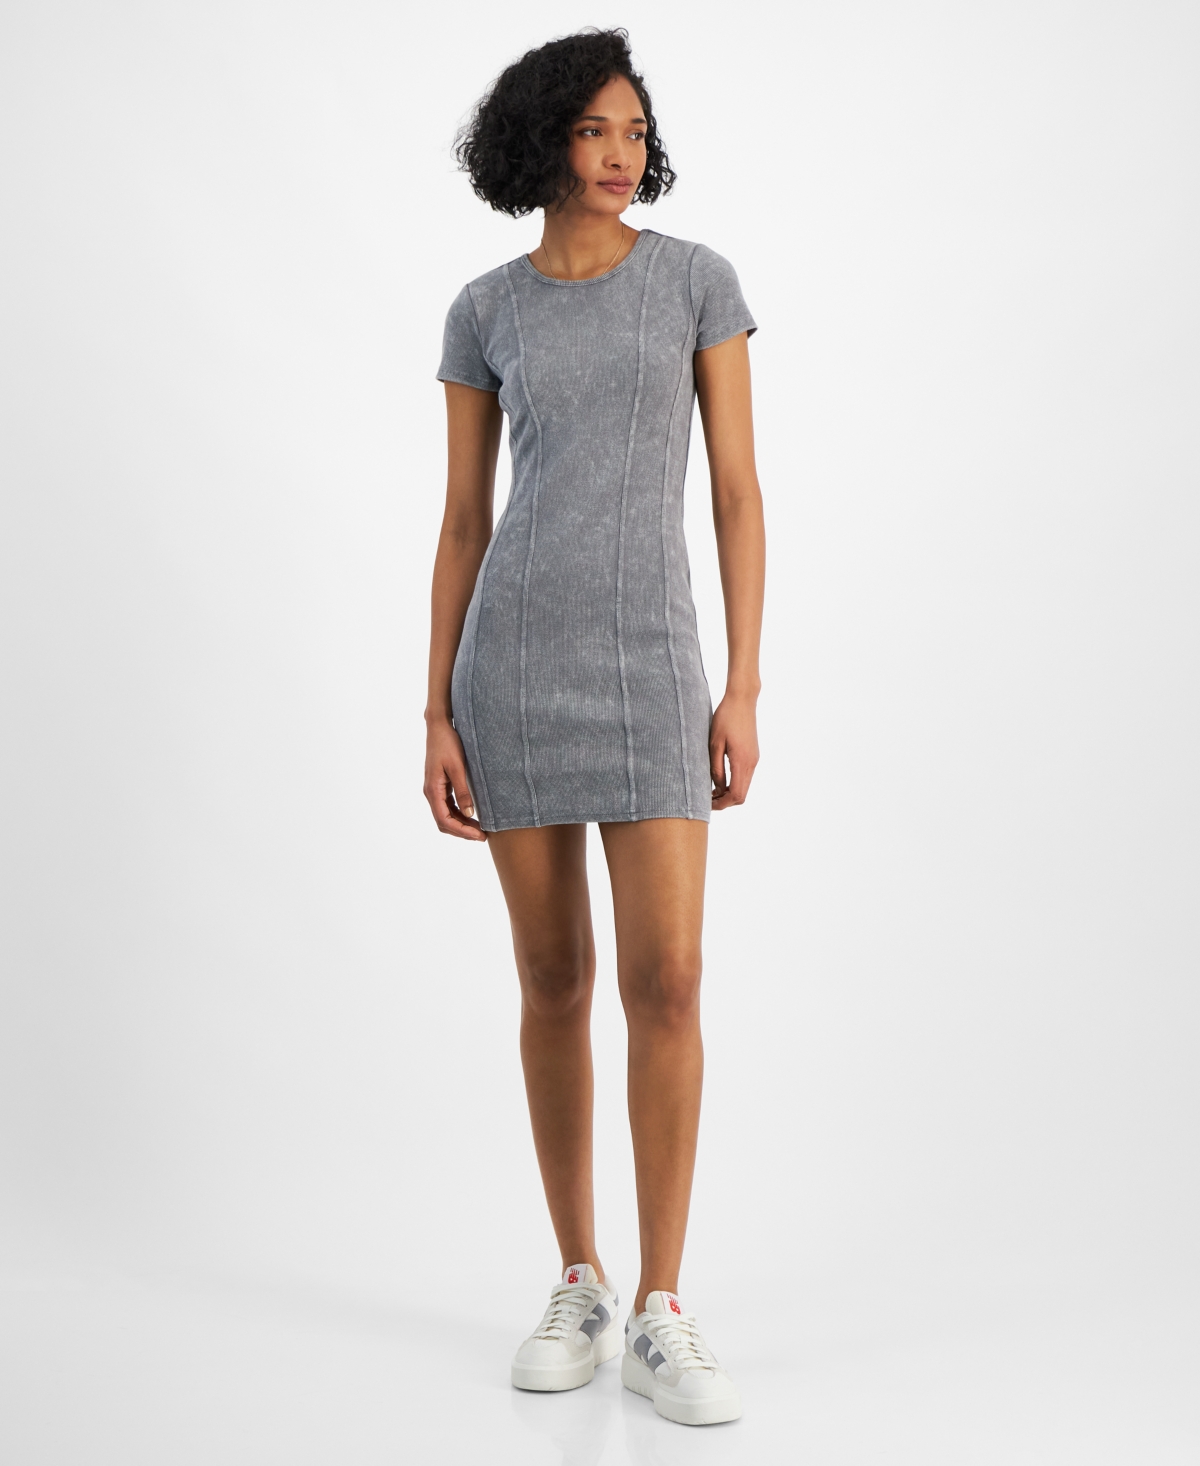 Madden Girl Juniors' Ribbed Knit T-shirt Dress In Charcoal